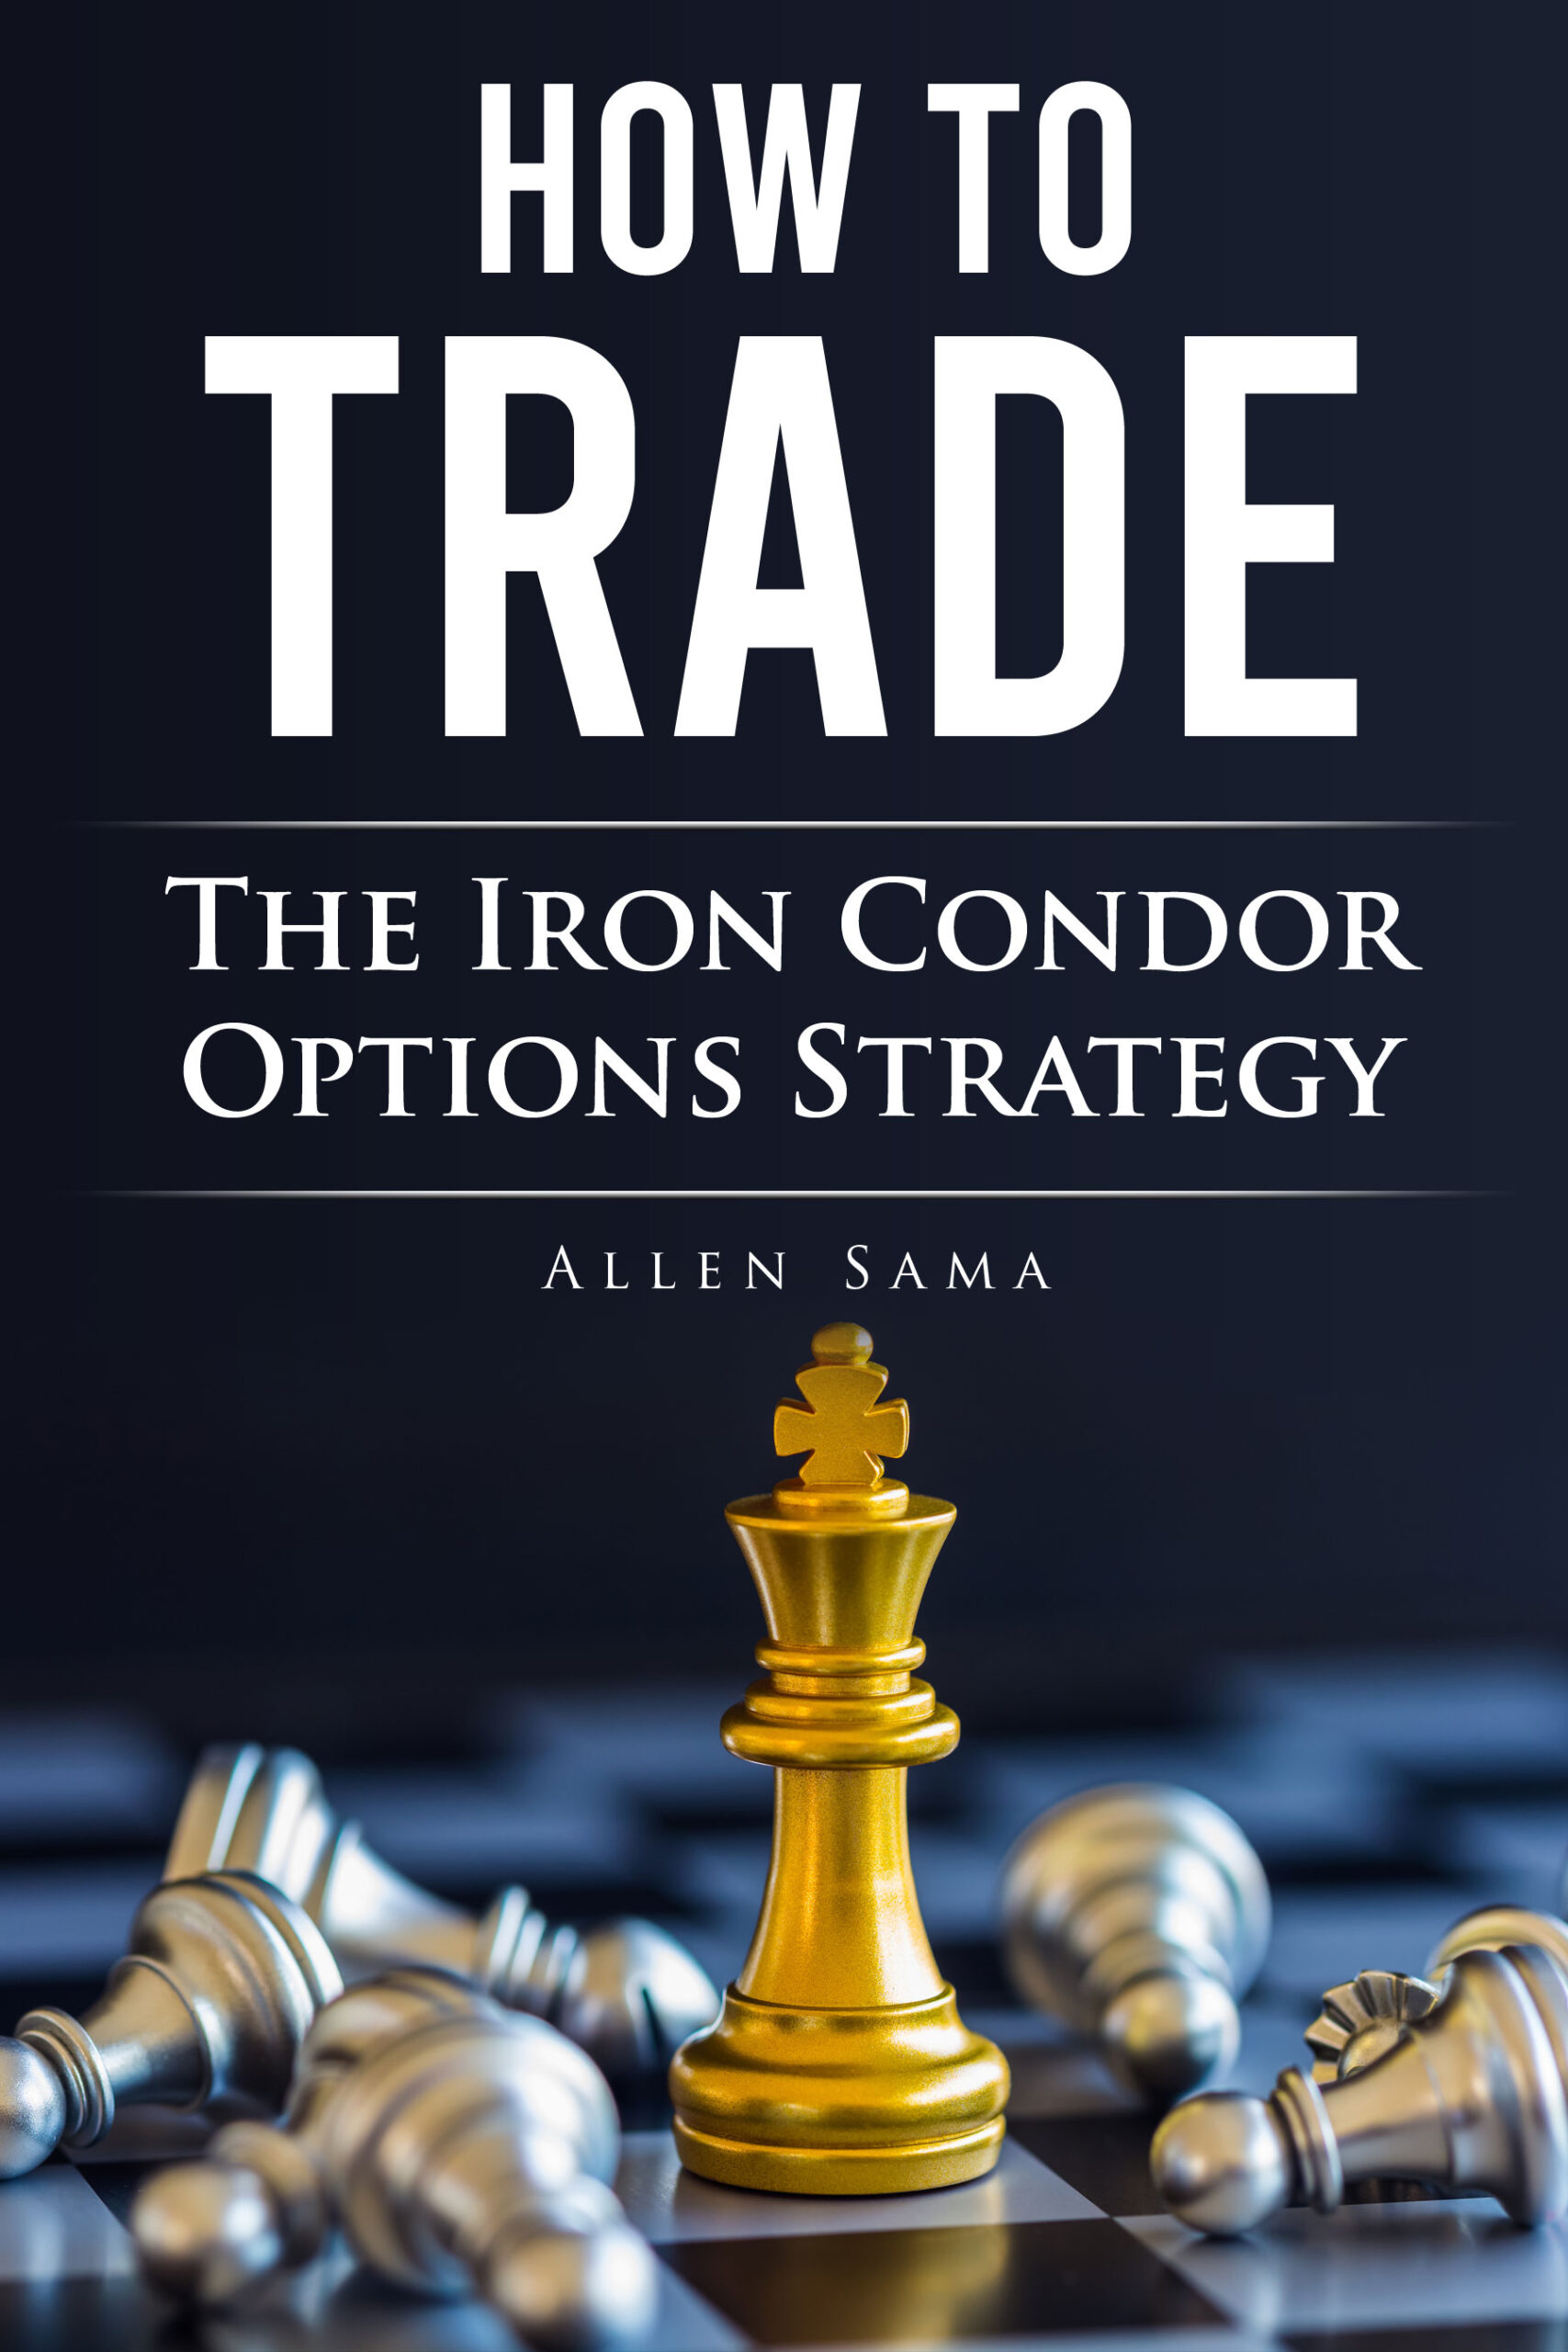 FREE: How To Trade The Iron Condor Options Strategy by Allen Sama